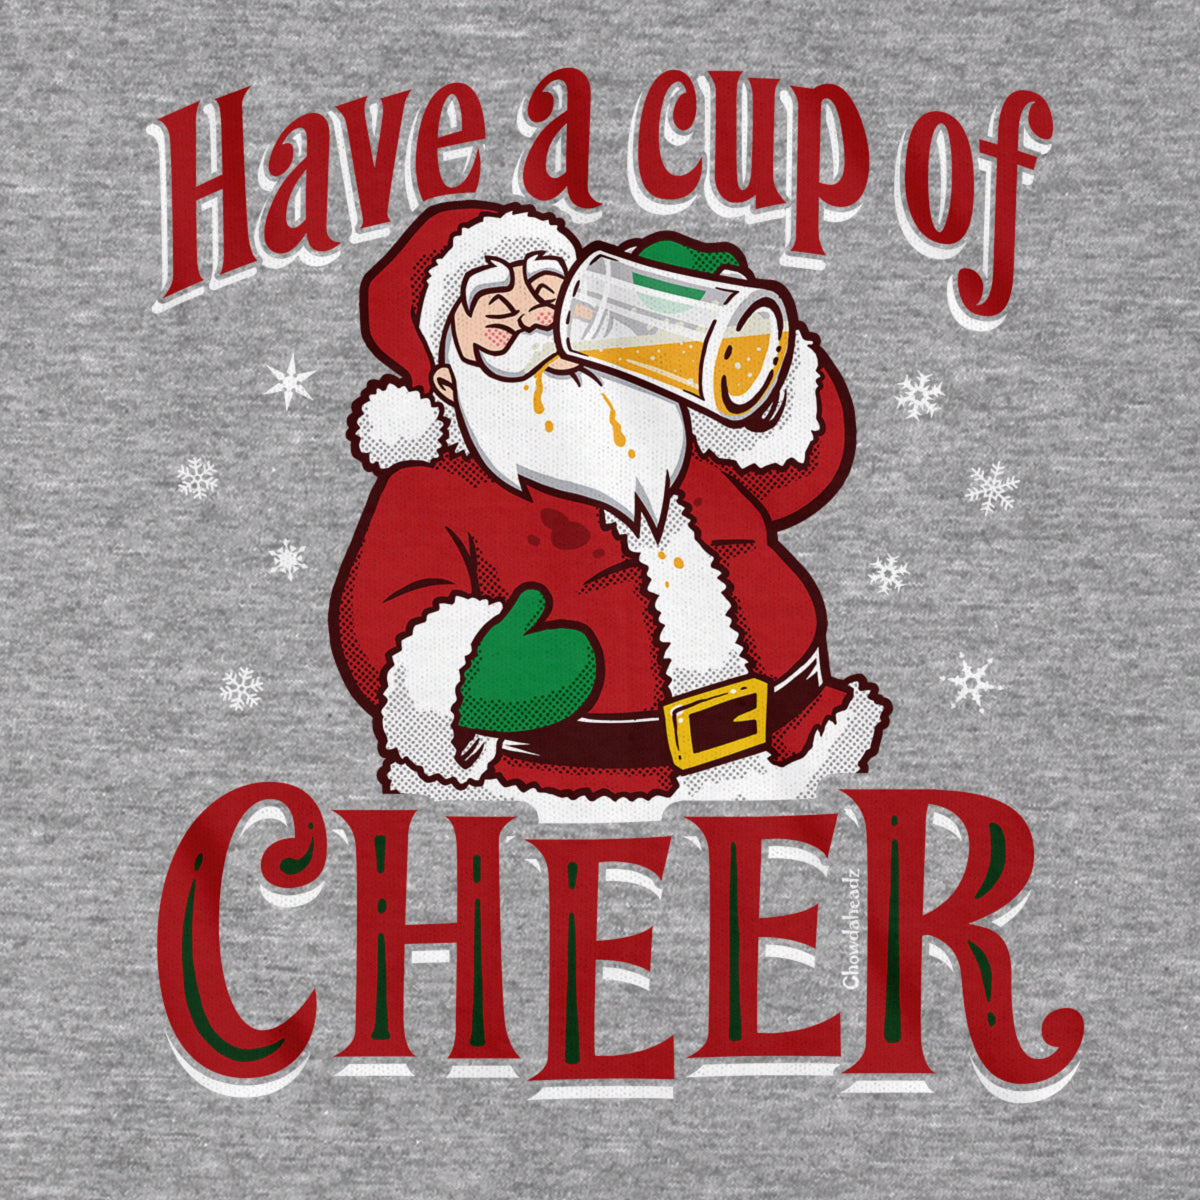 Have A Cup Of Cheer T-Shirt - Chowdaheadz